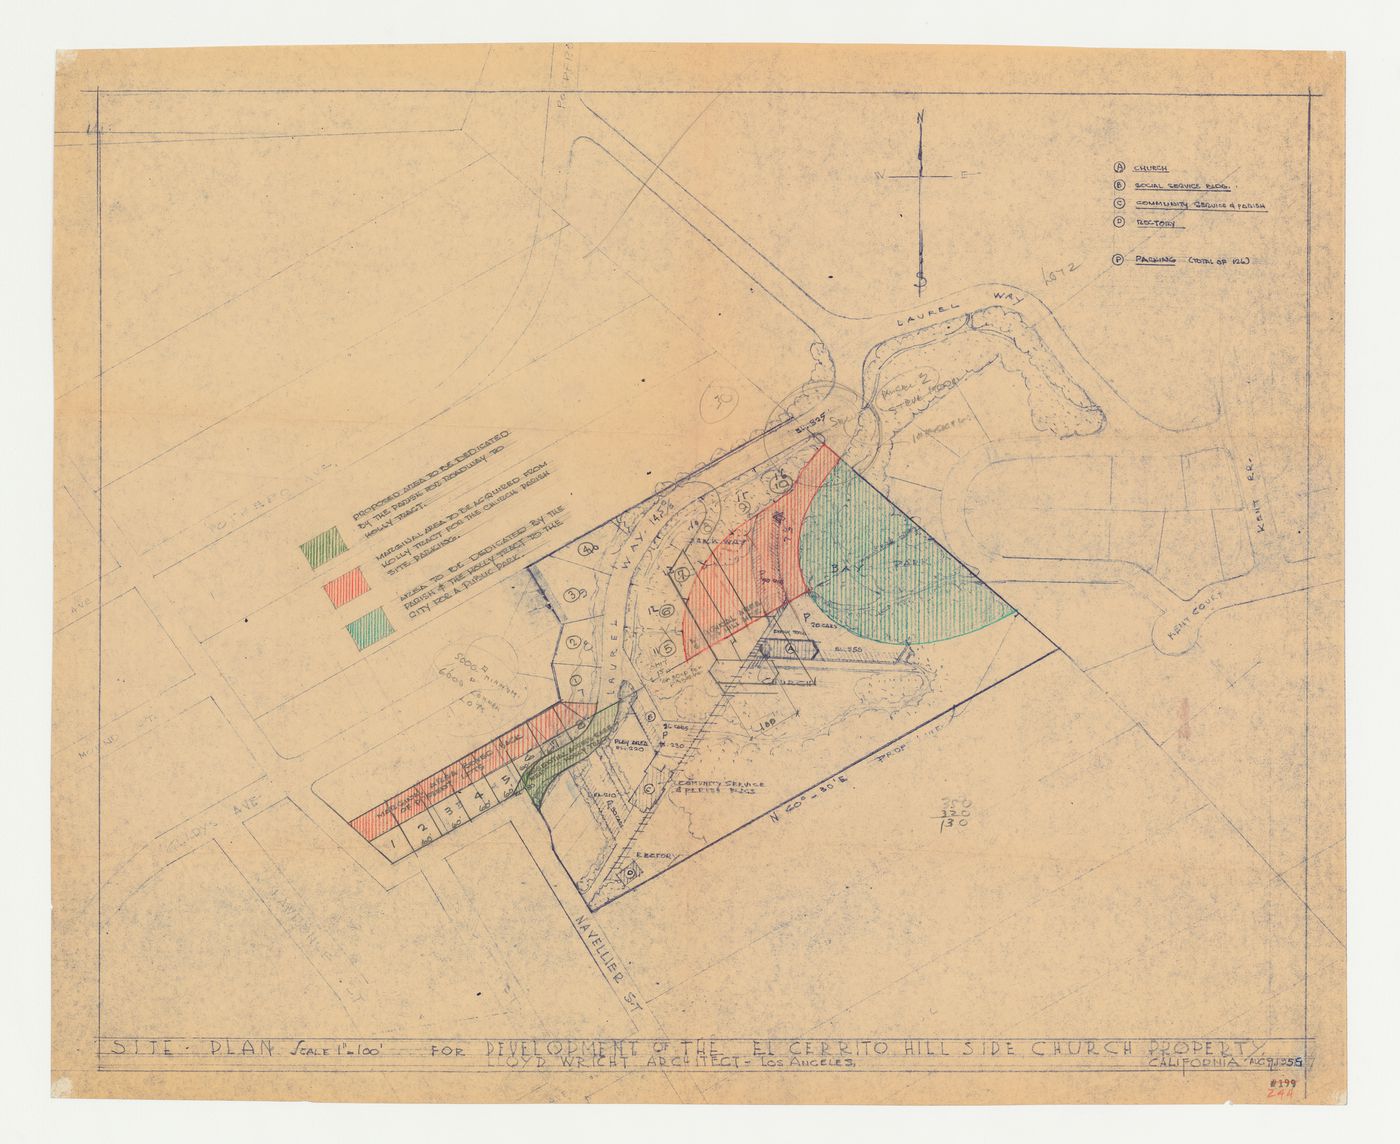 Swedenborg Memorial Chapel, El Cerrito, California: Site plan showing areas to be purchased from adjoining lot